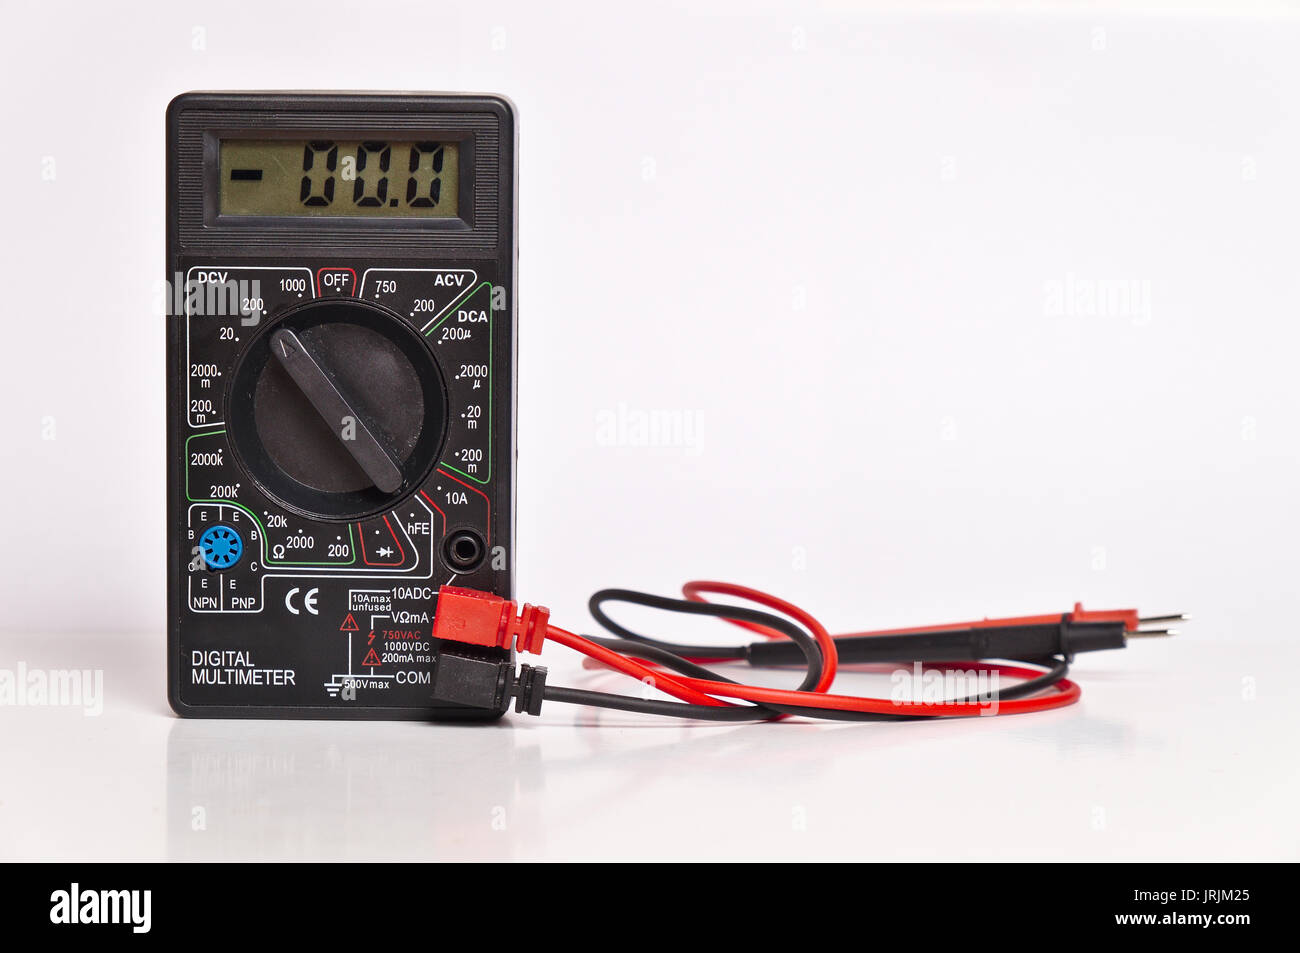 Digital multimeter in a black color casing with cords attached Stock Photo